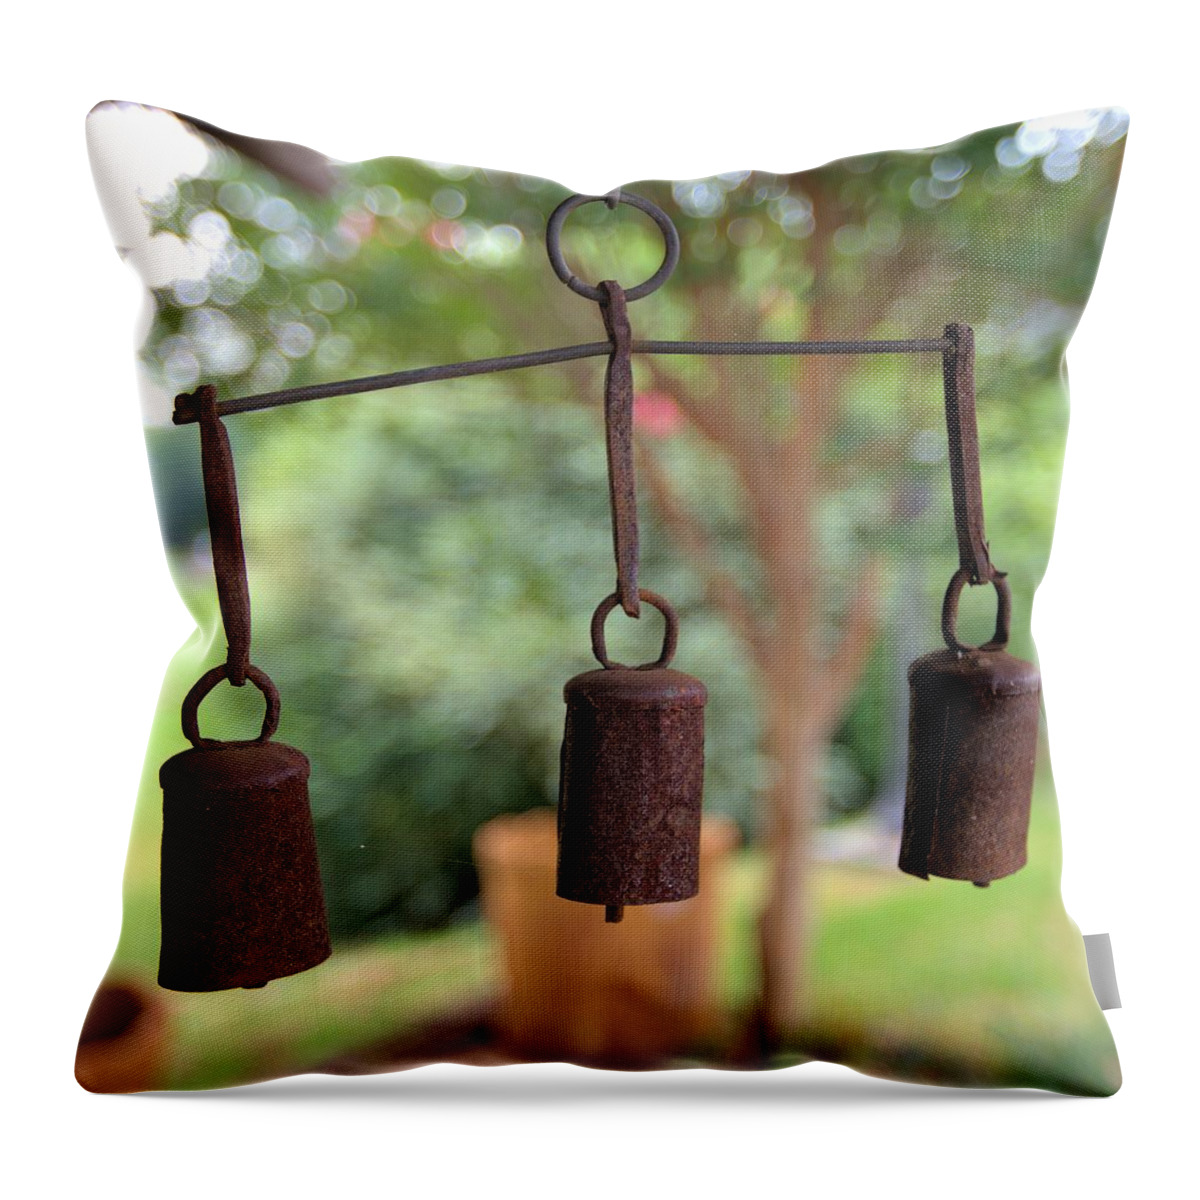 6084 Throw Pillow featuring the photograph Three Bells - Square by Gordon Elwell